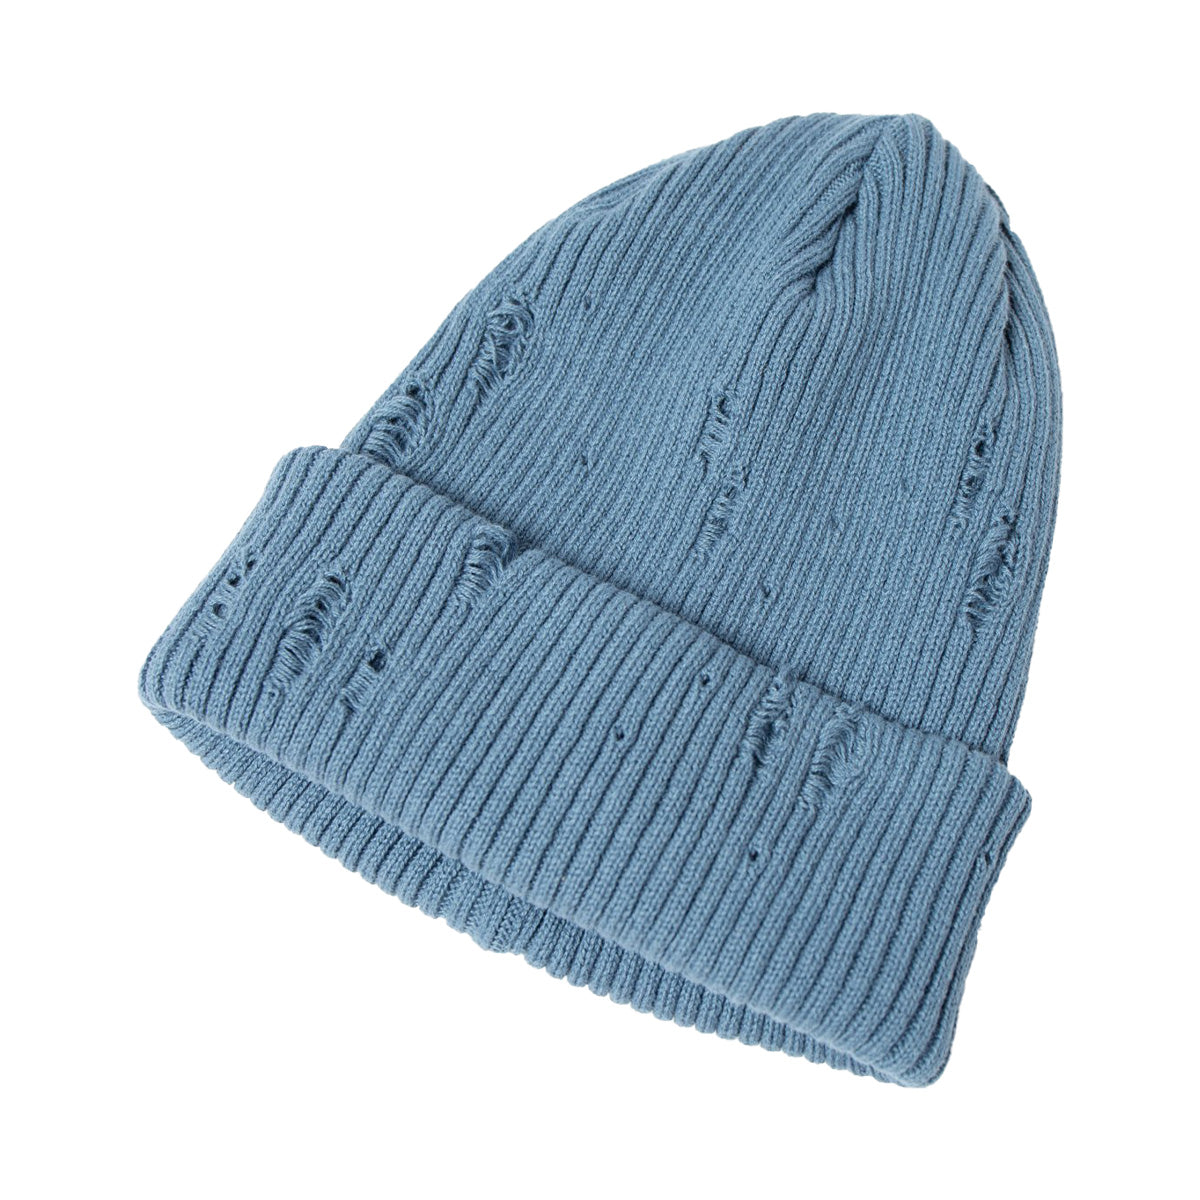 Racal Ripped Cotton Knit Watch Cap, Blue